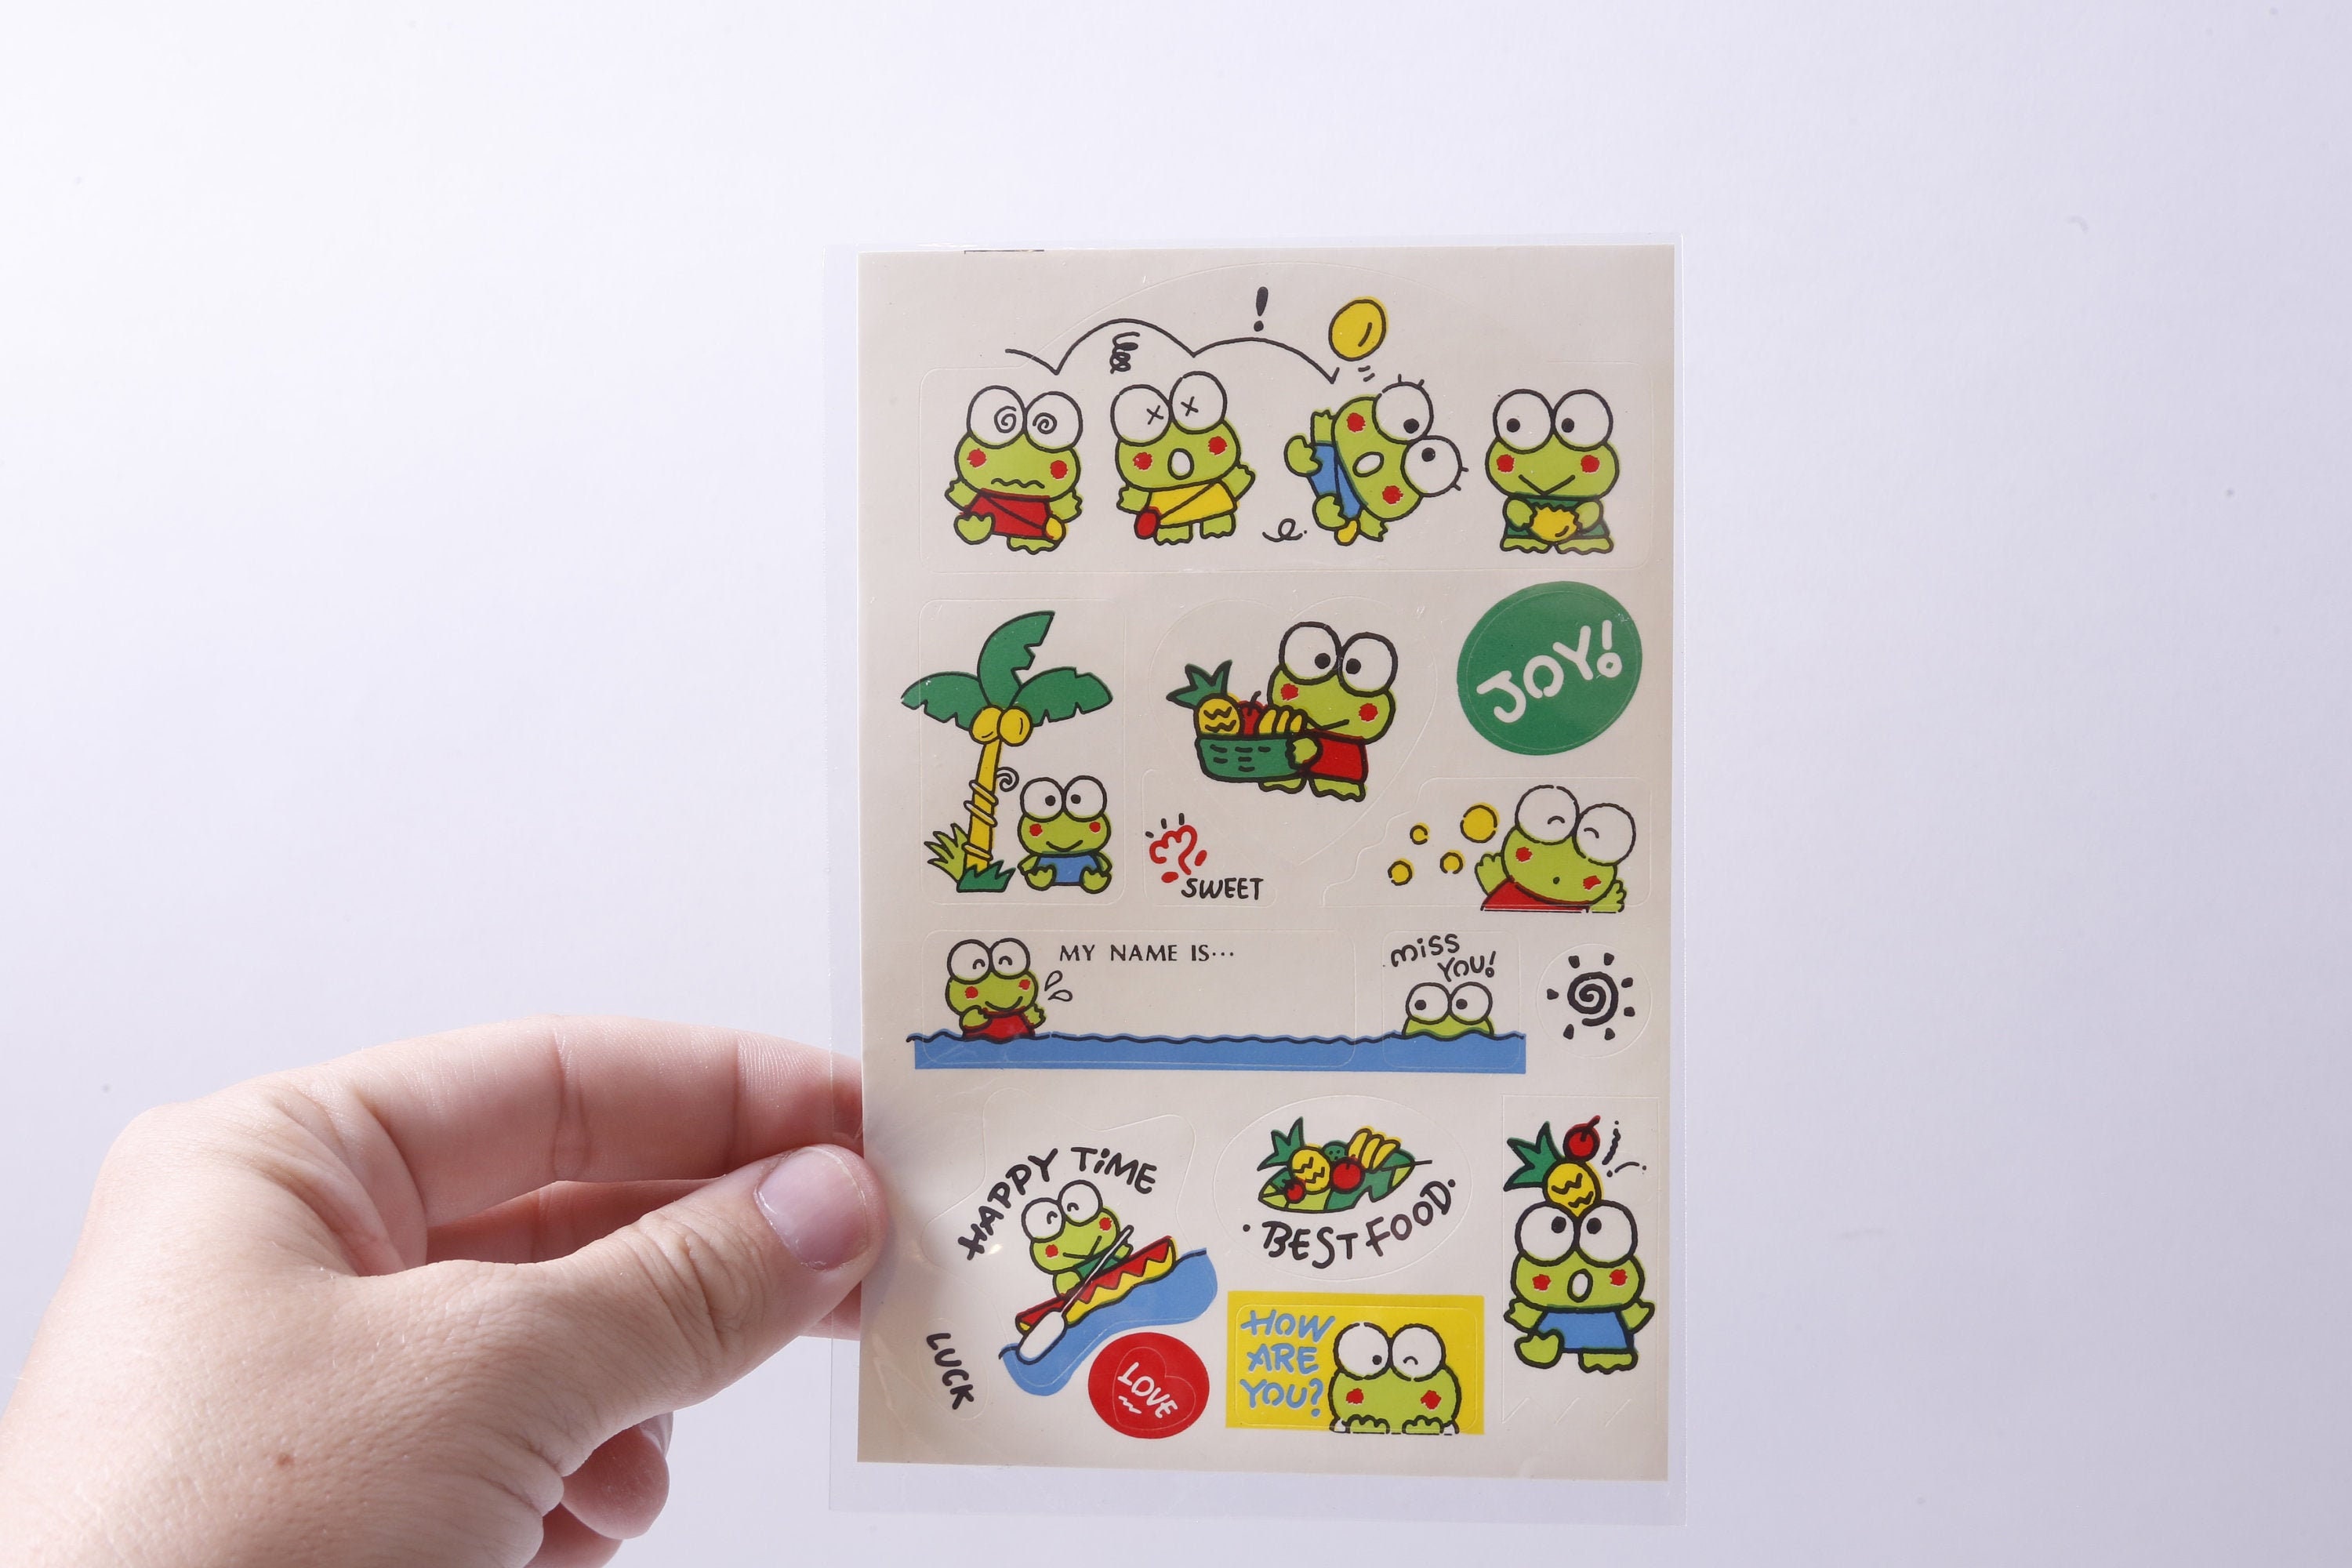 How to Draw a Cute Frog  Sanrio Keroppi 